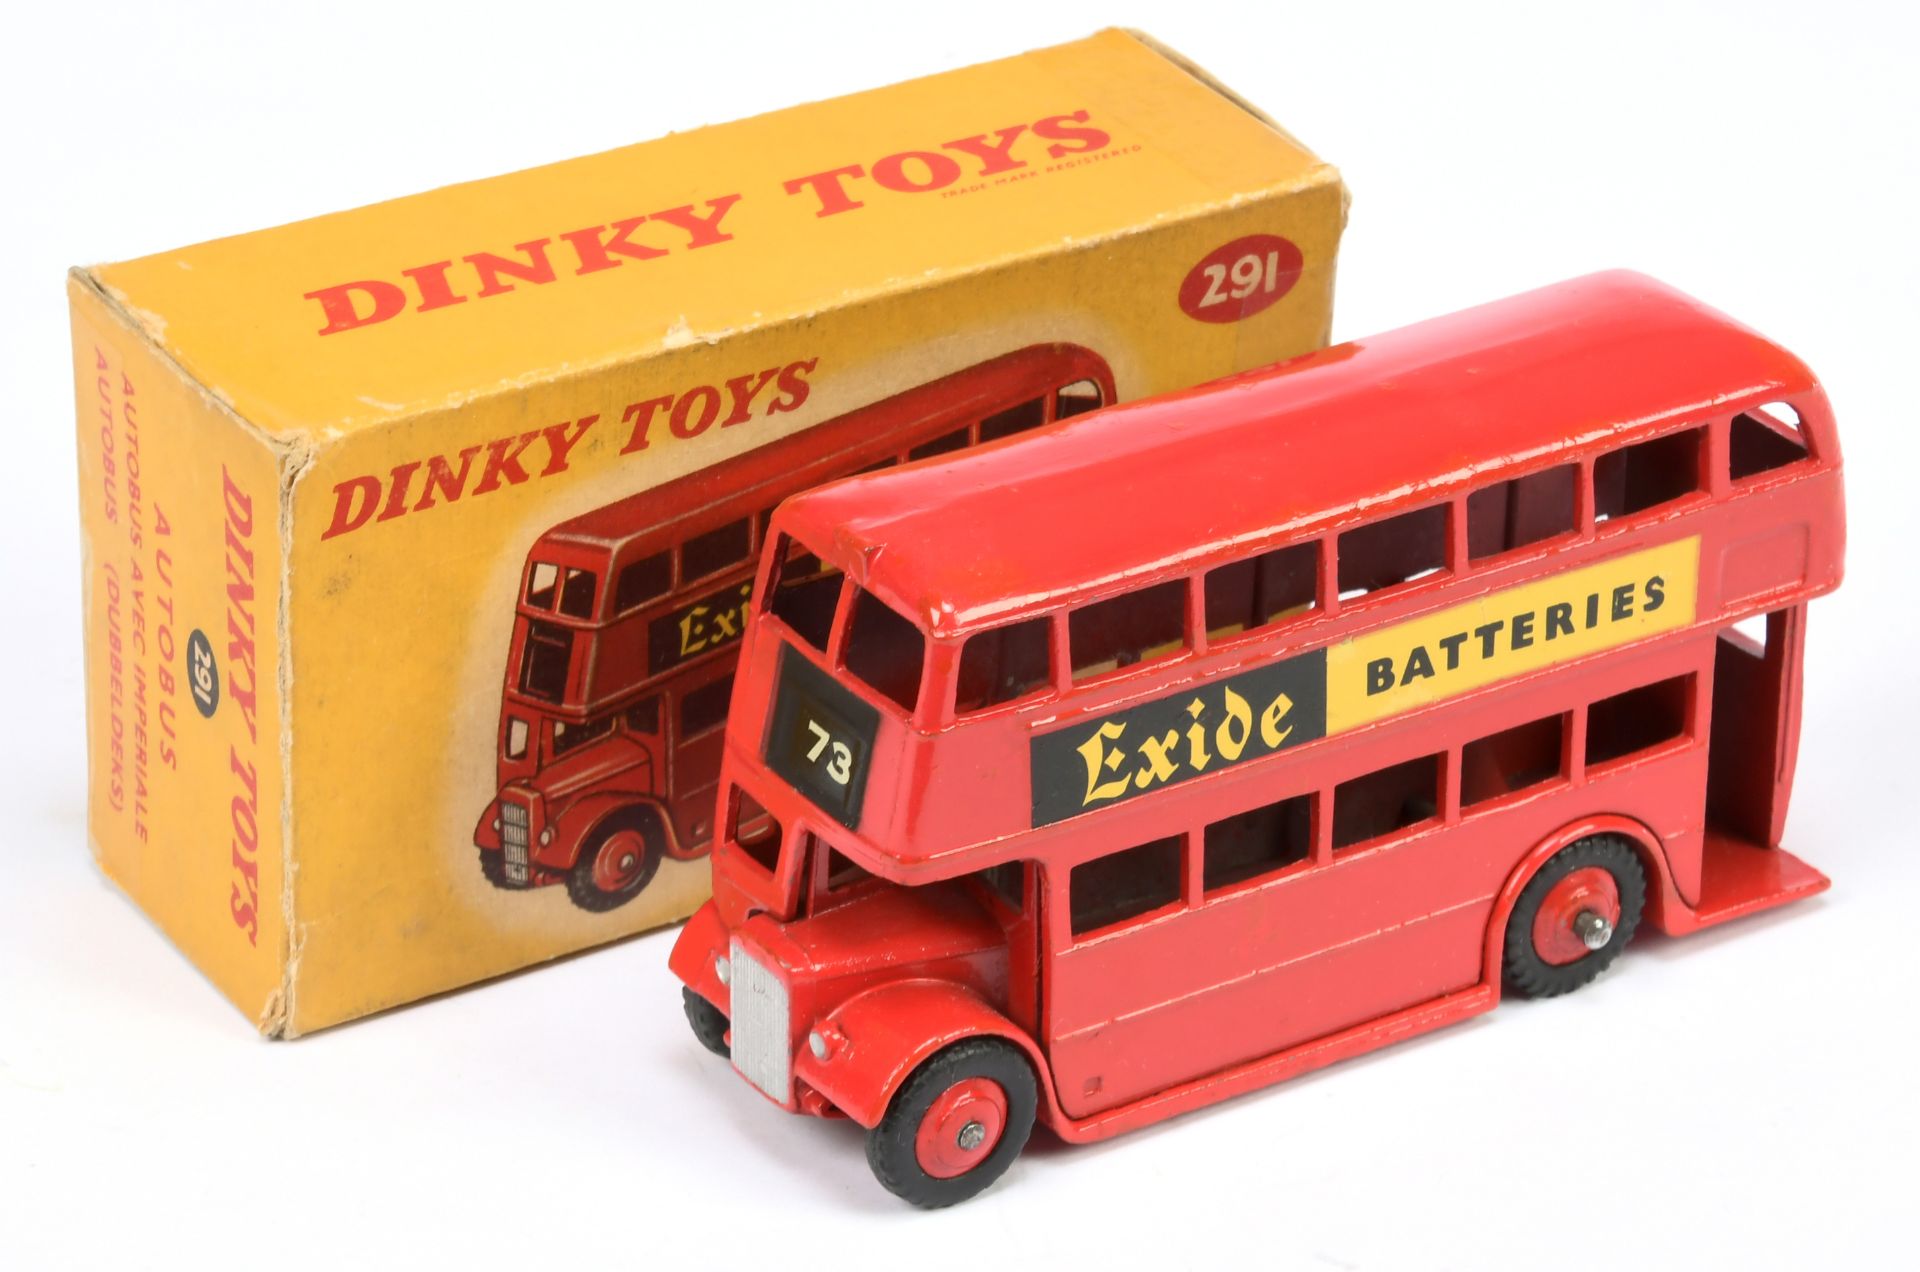 Dinky Toys 291 Doubles Decker Bus (Type 3) "Exide Batteries"  - Red body and rigid hubs with blac...